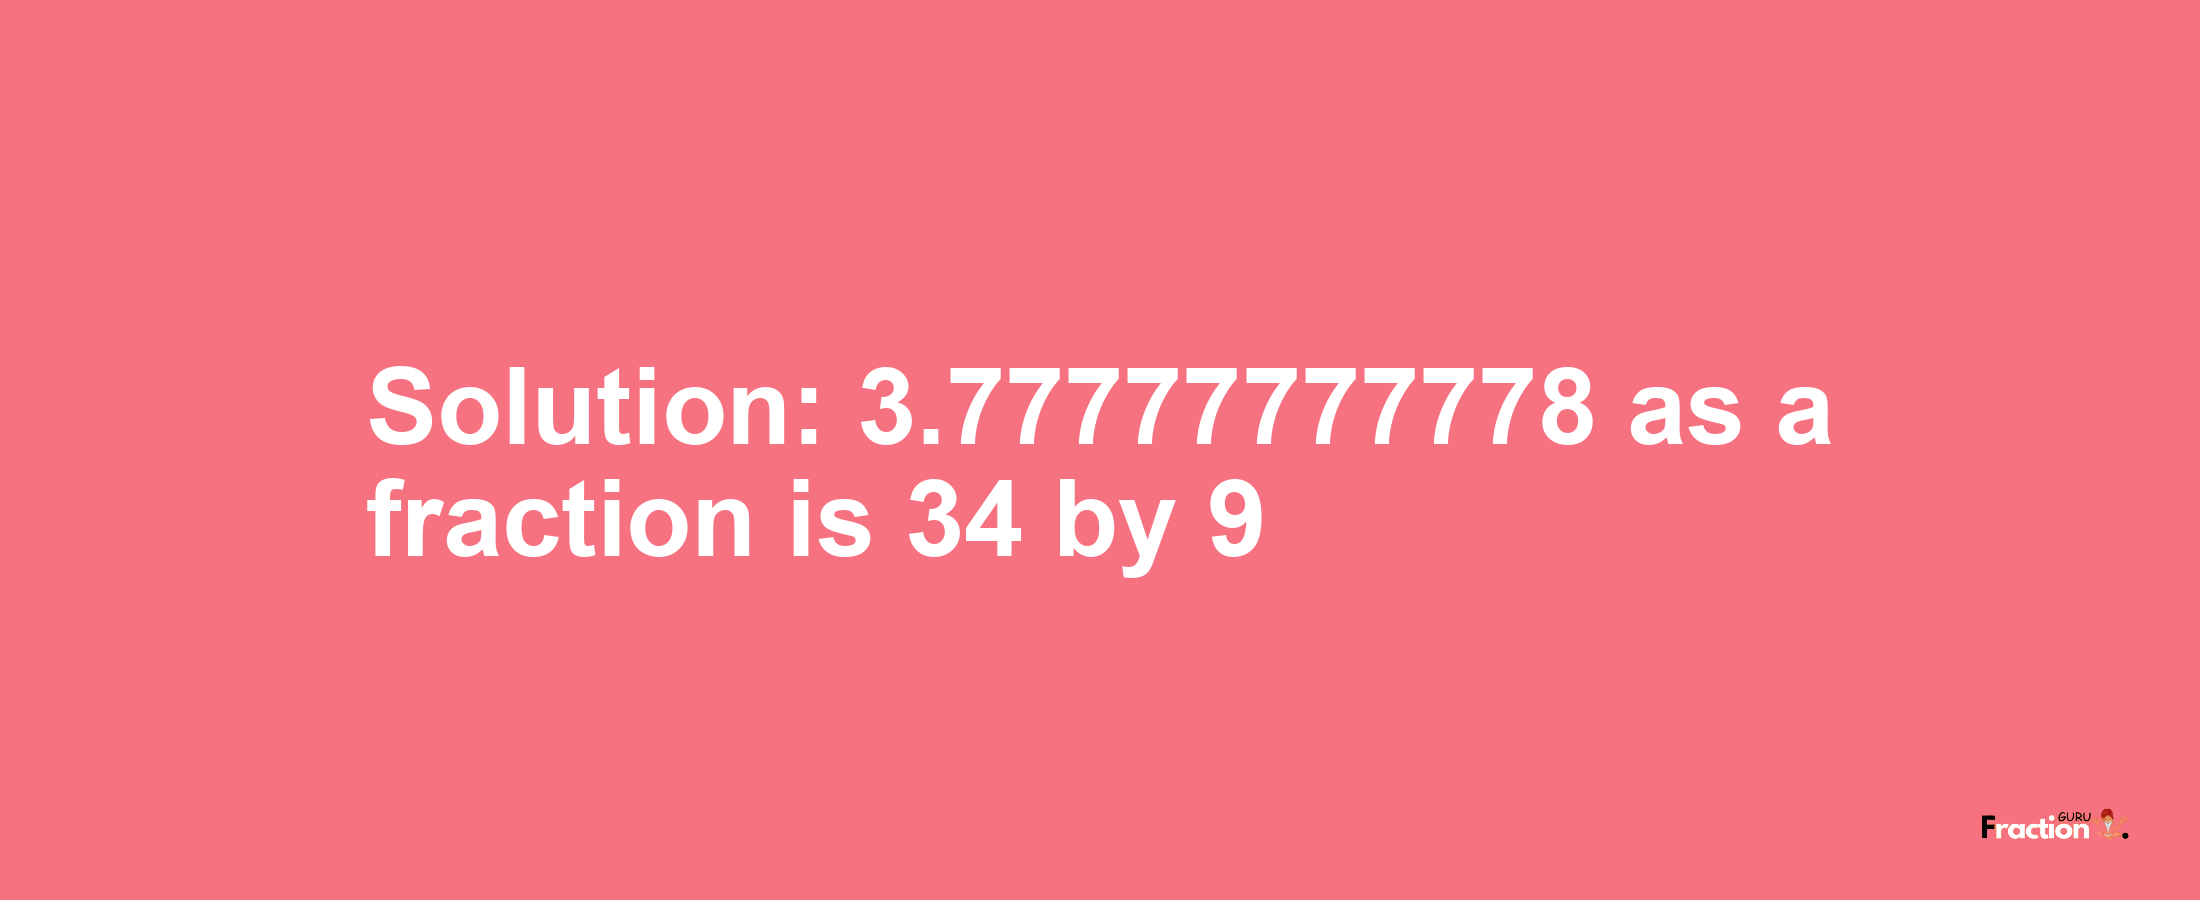 Solution:3.77777777778 as a fraction is 34/9